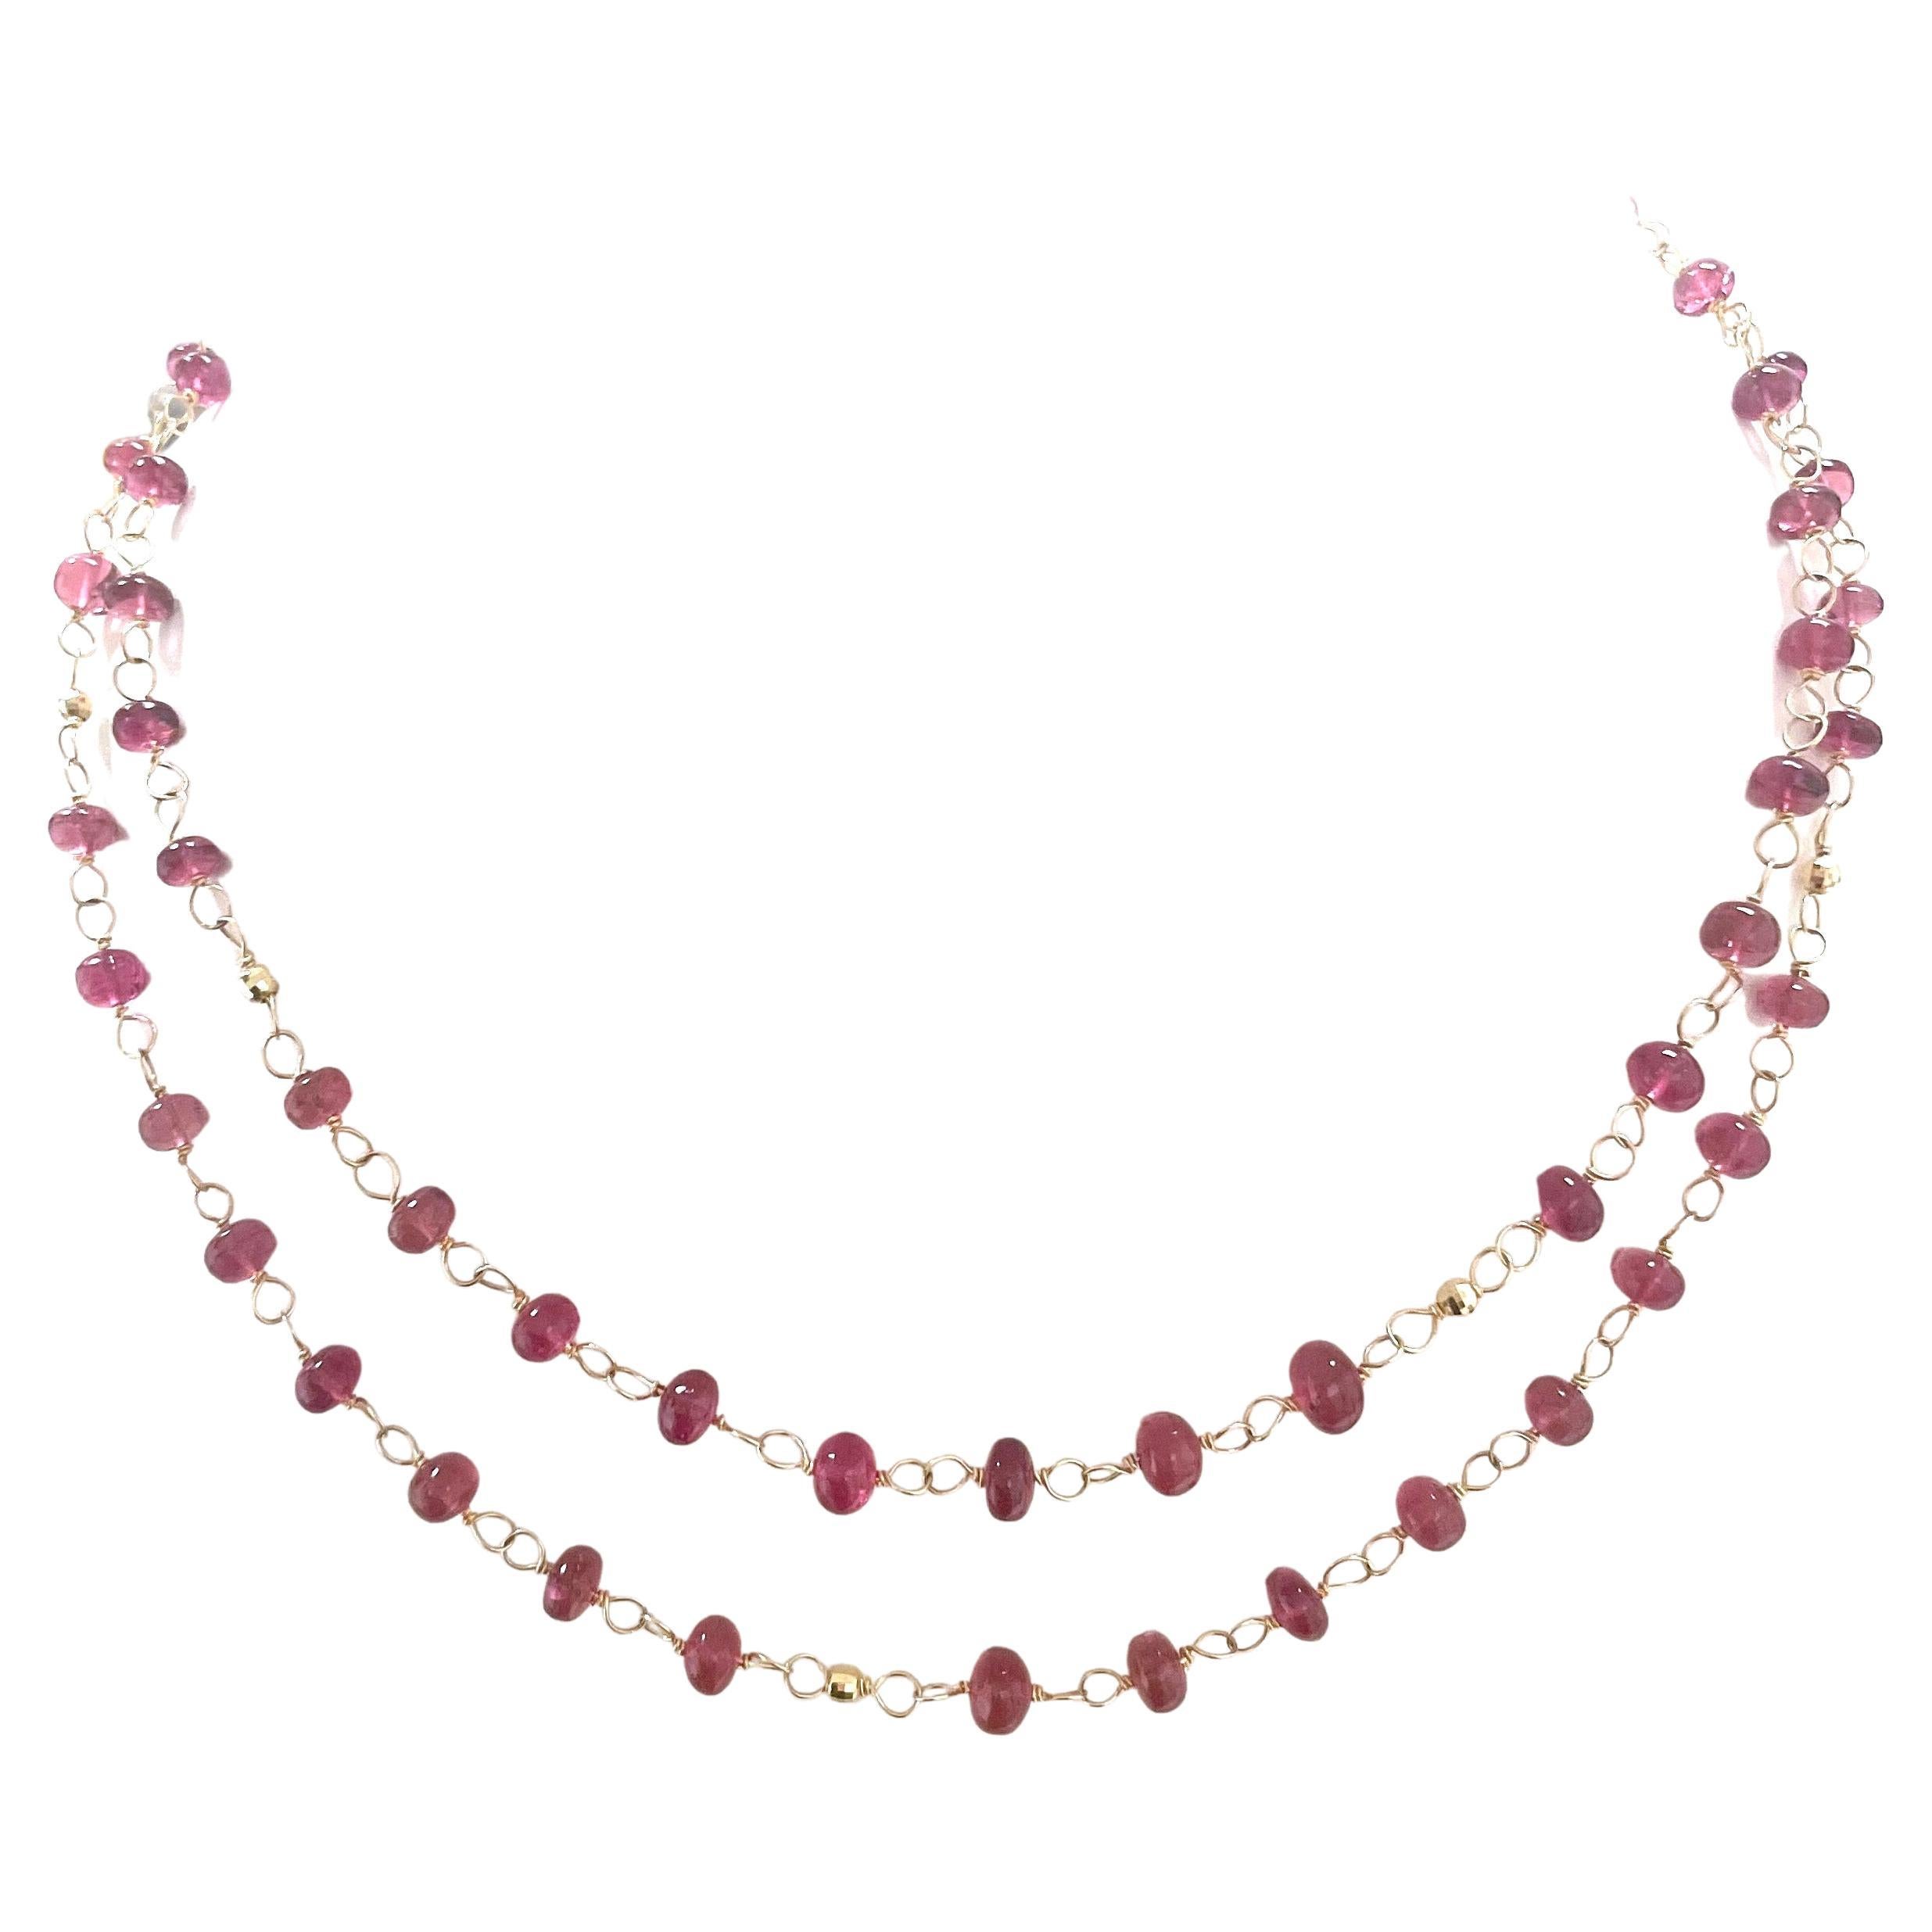 Description
The exceptional quality, clarity and color of every pink Tourmaline stone in the necklace elevates its beauty and creates a superb statement for the wearer. 
Necklace can be worn long or short if doubled.  Item # N3756

Materials and